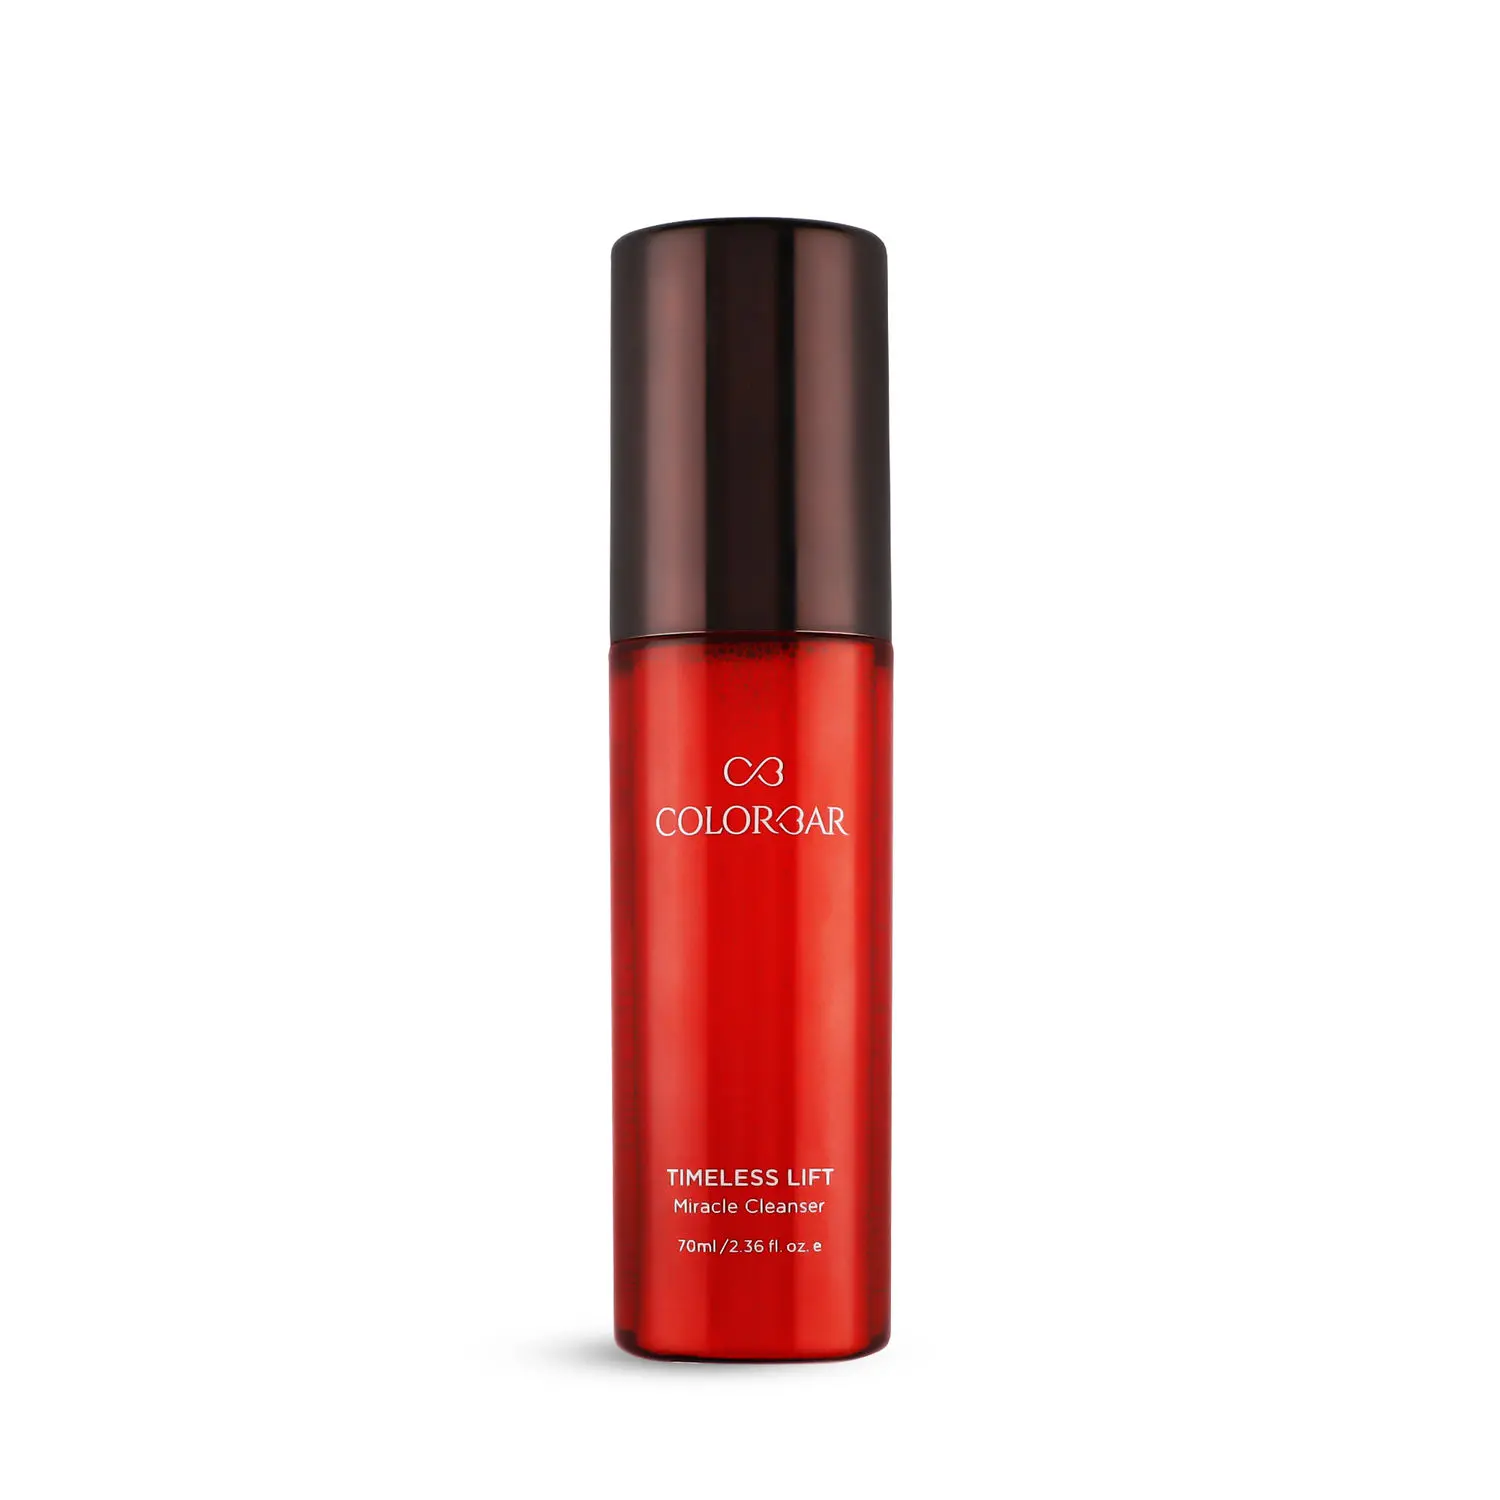 Colorbar Timeless Lift Miracle Cleanser (70 ml)